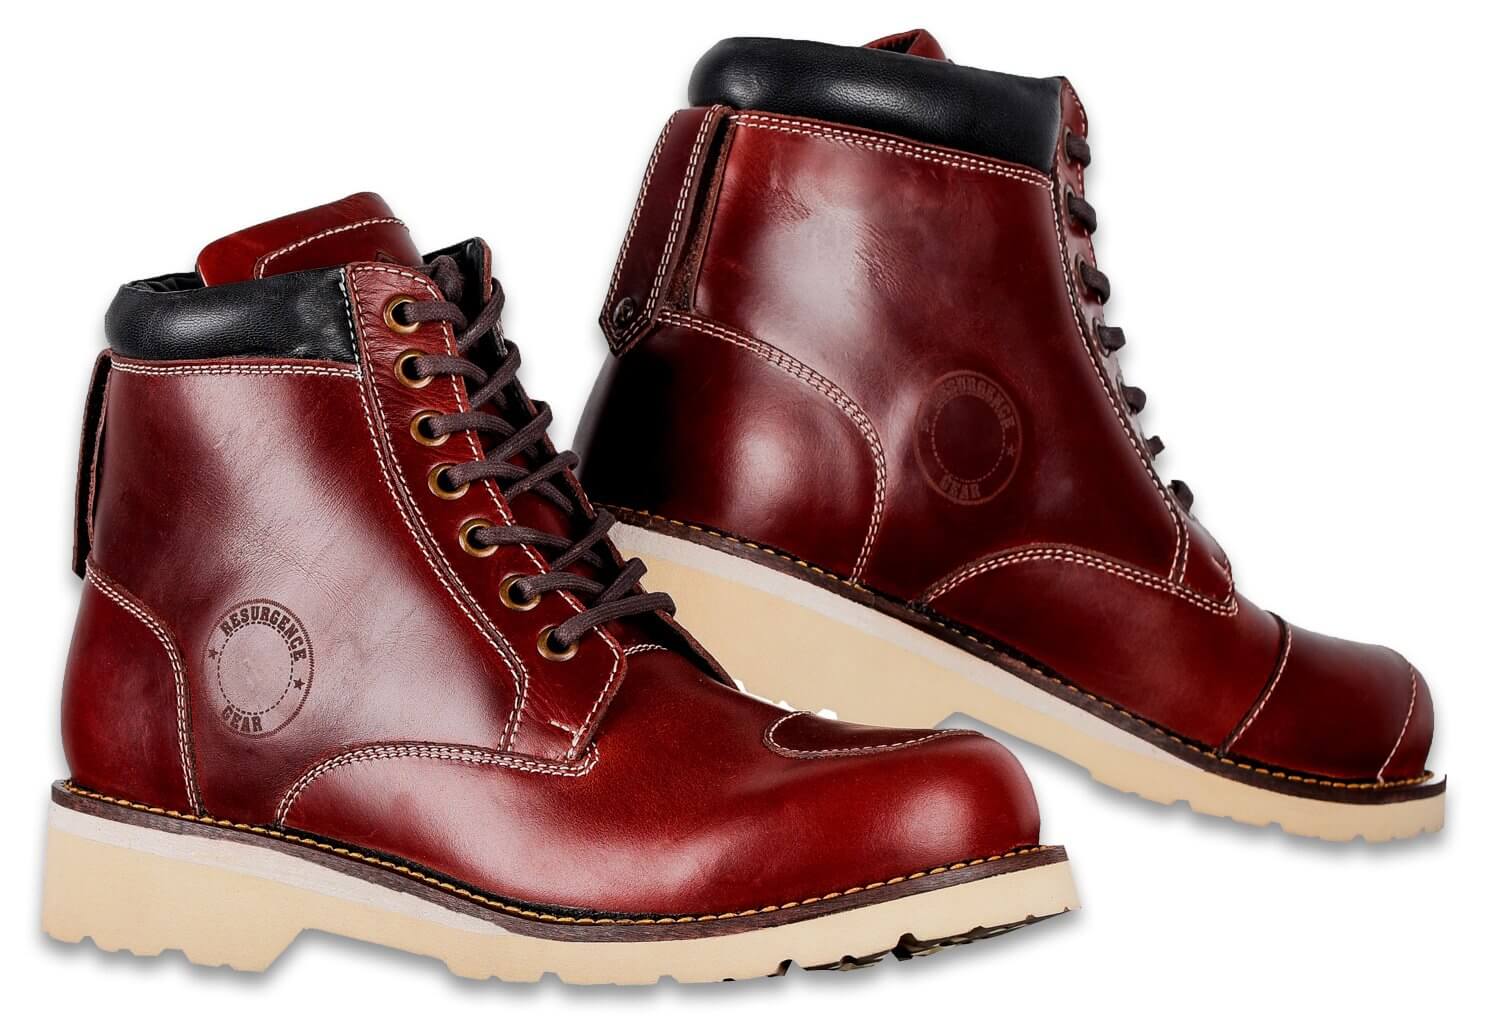 cafe racer motorcycle boots